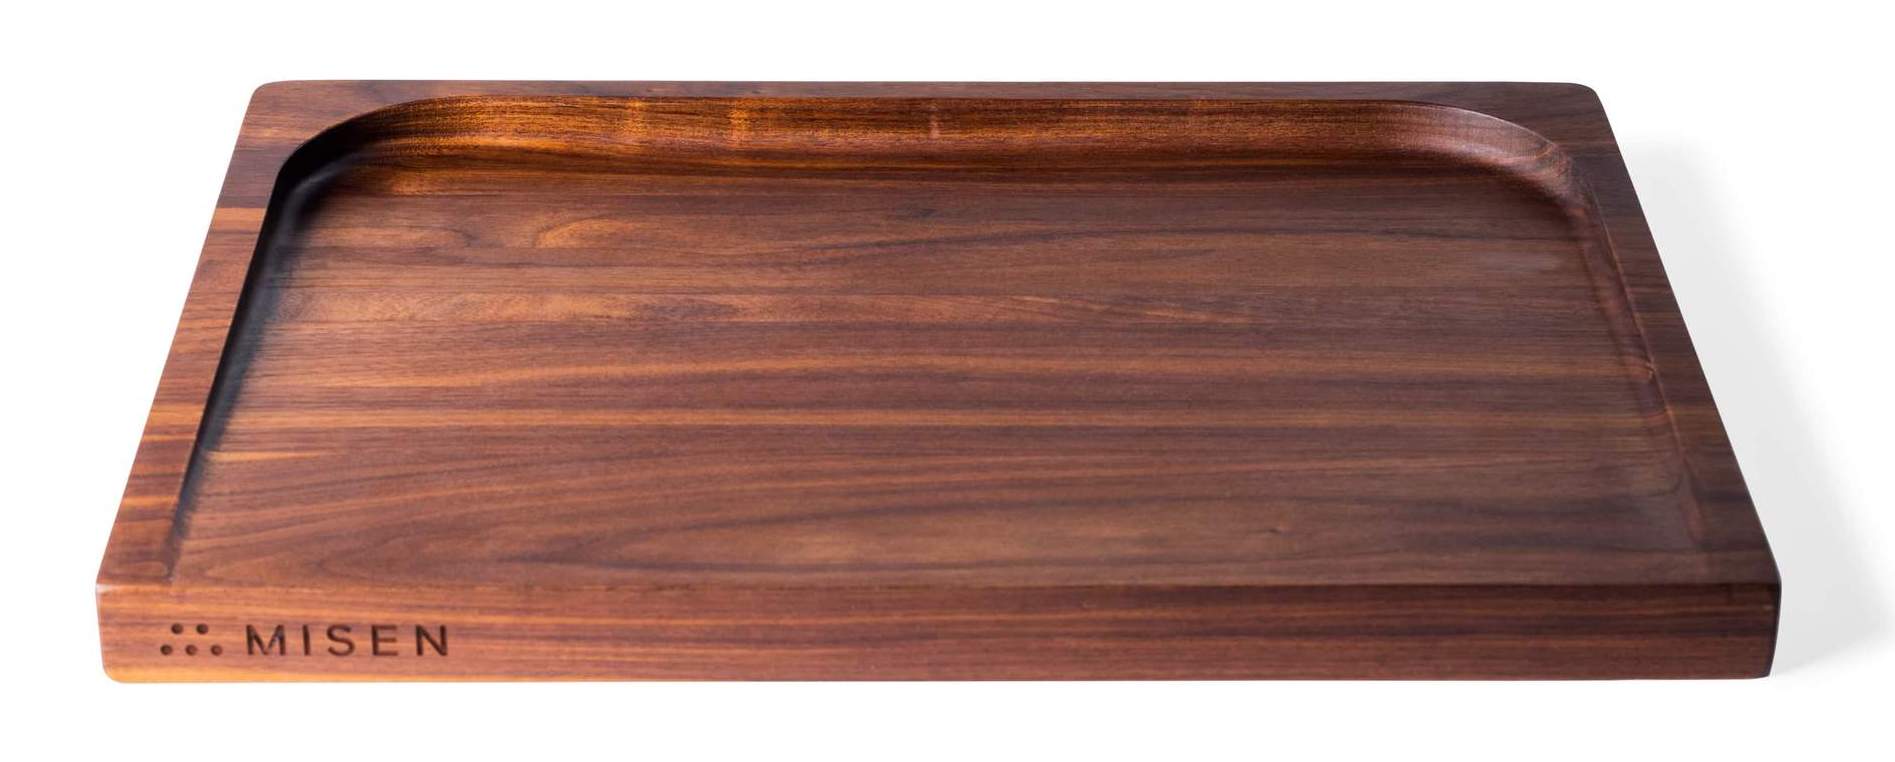 How to Clean a Wooden Cutting Board: Simple Steps for a Safe Board